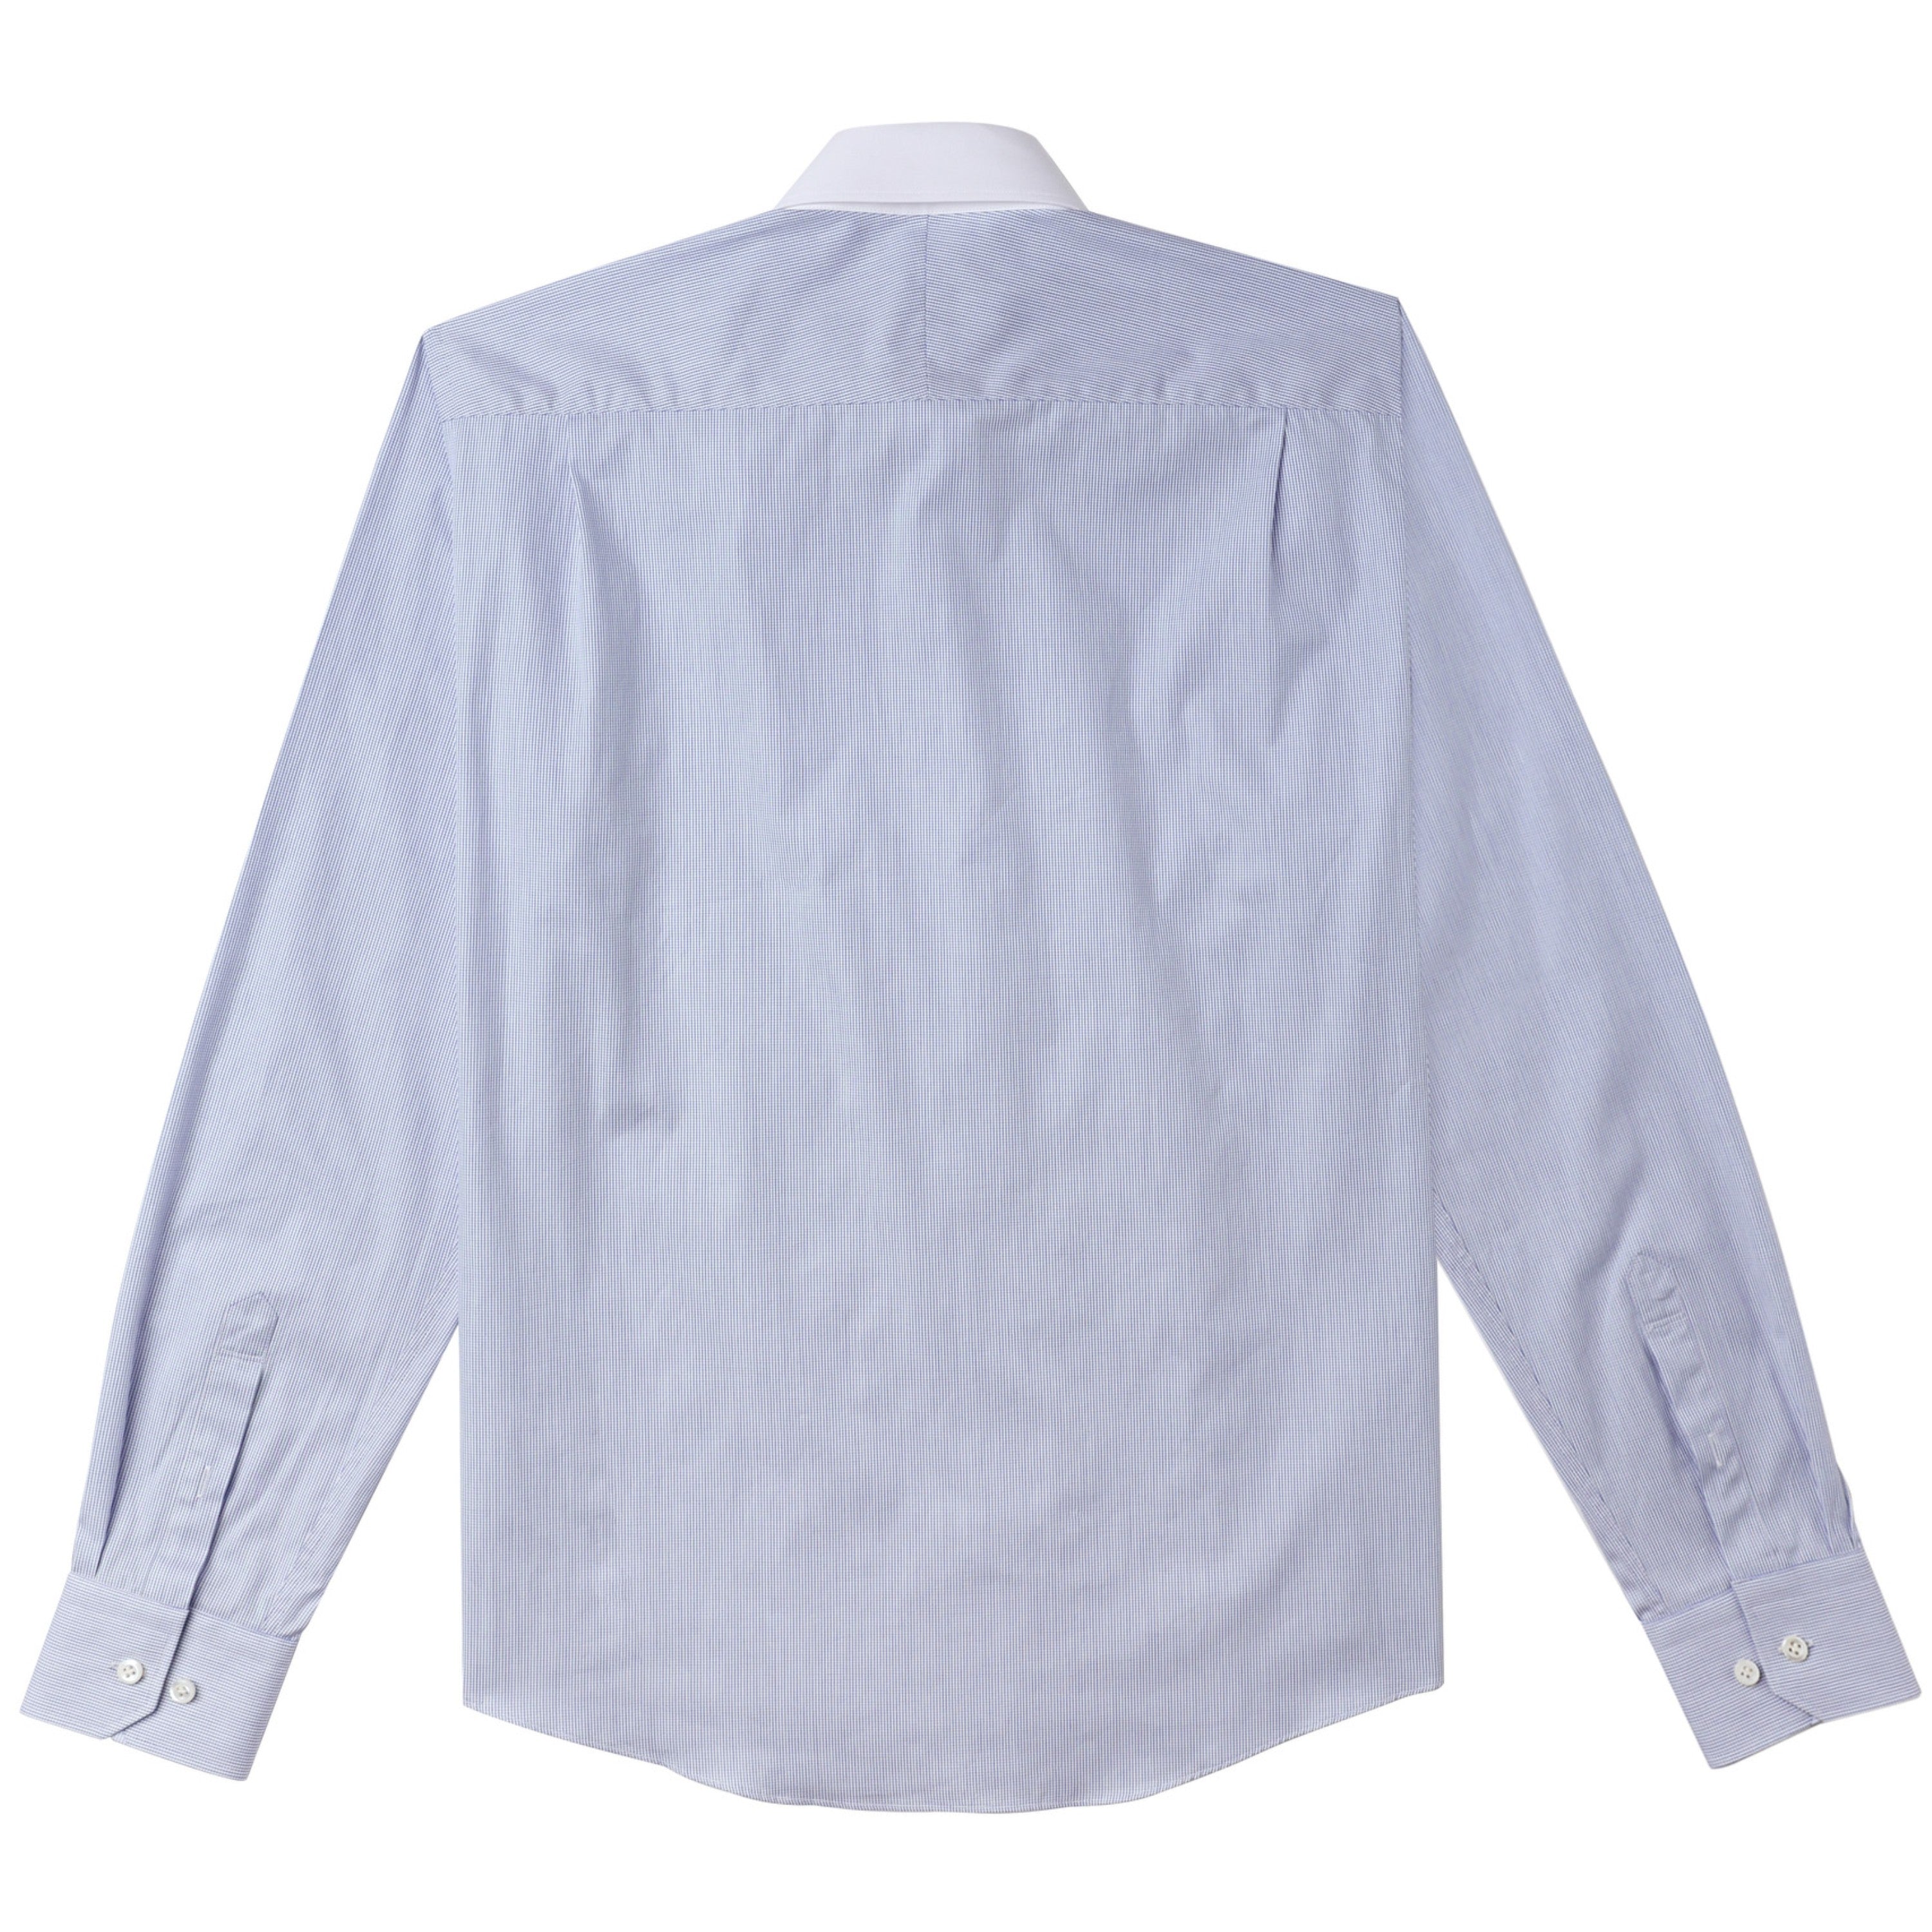 THE AILEY SHIRT (LIGHT BLUE)HIGH-END Sustainable DRESSY SMART CASUAL MEN'S SHIRT BACK 